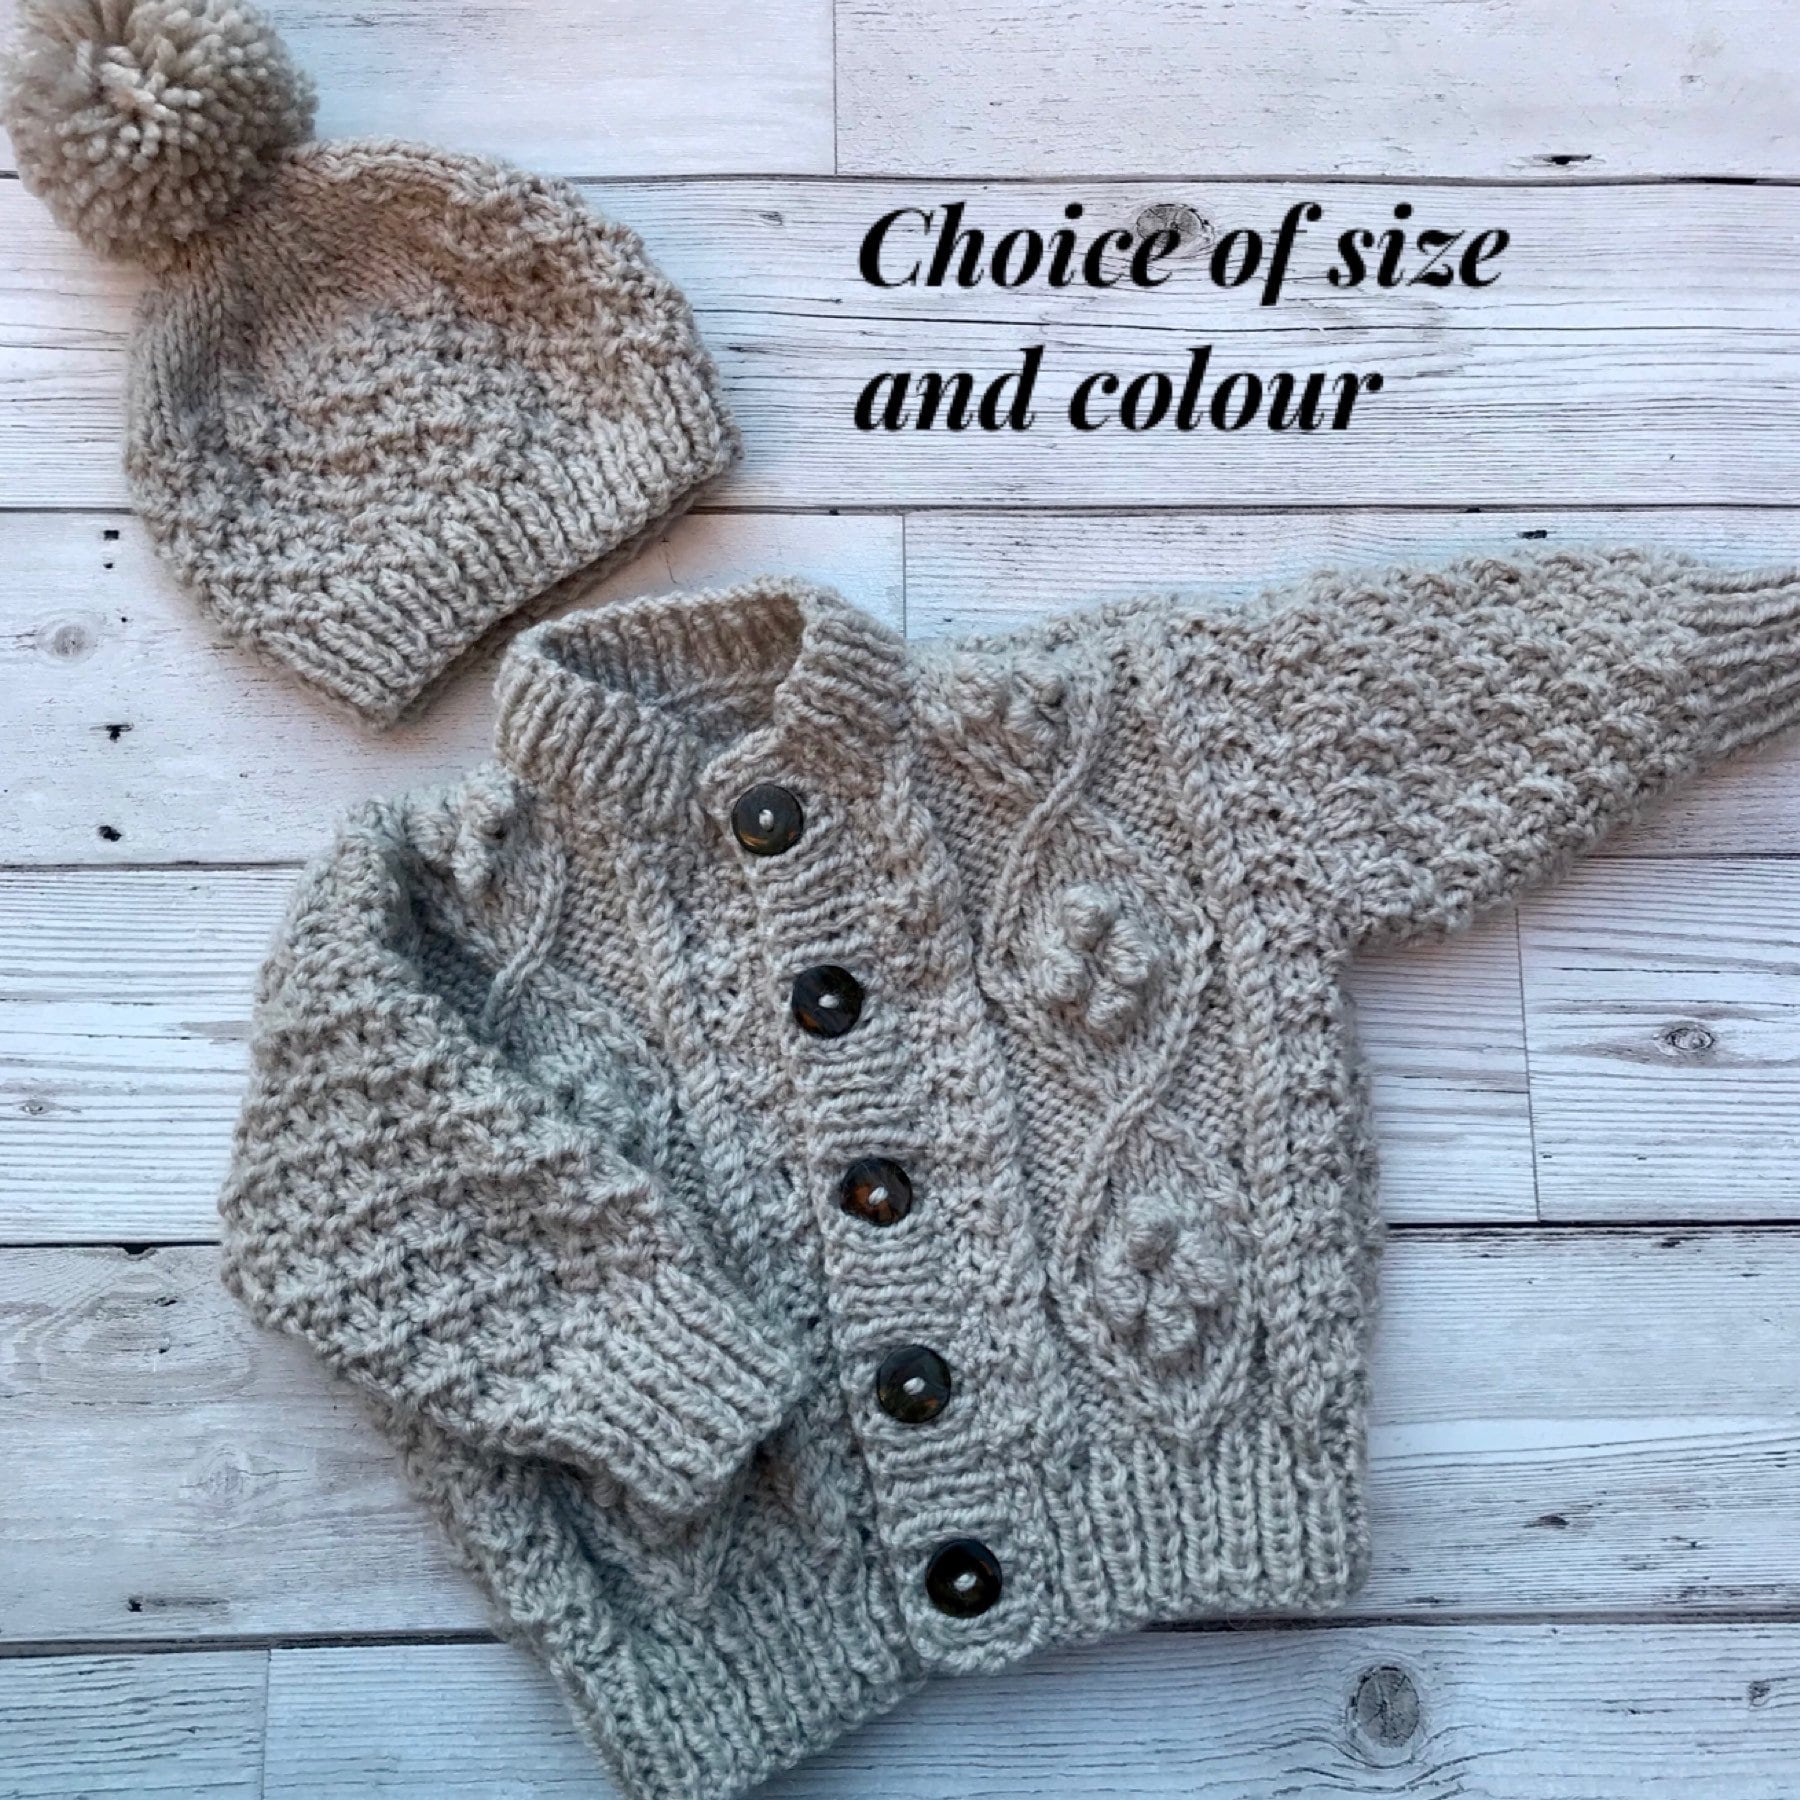 Clothing Unisex Kids Clothing Clothing Sets Handknitted Baby Cardigan,Handmade Baby Romper,Knit Baby Shoes,Baby Clothes Set,Baby Girl and Boy Coming Outfit,Organic Cotton%100,Unisex 